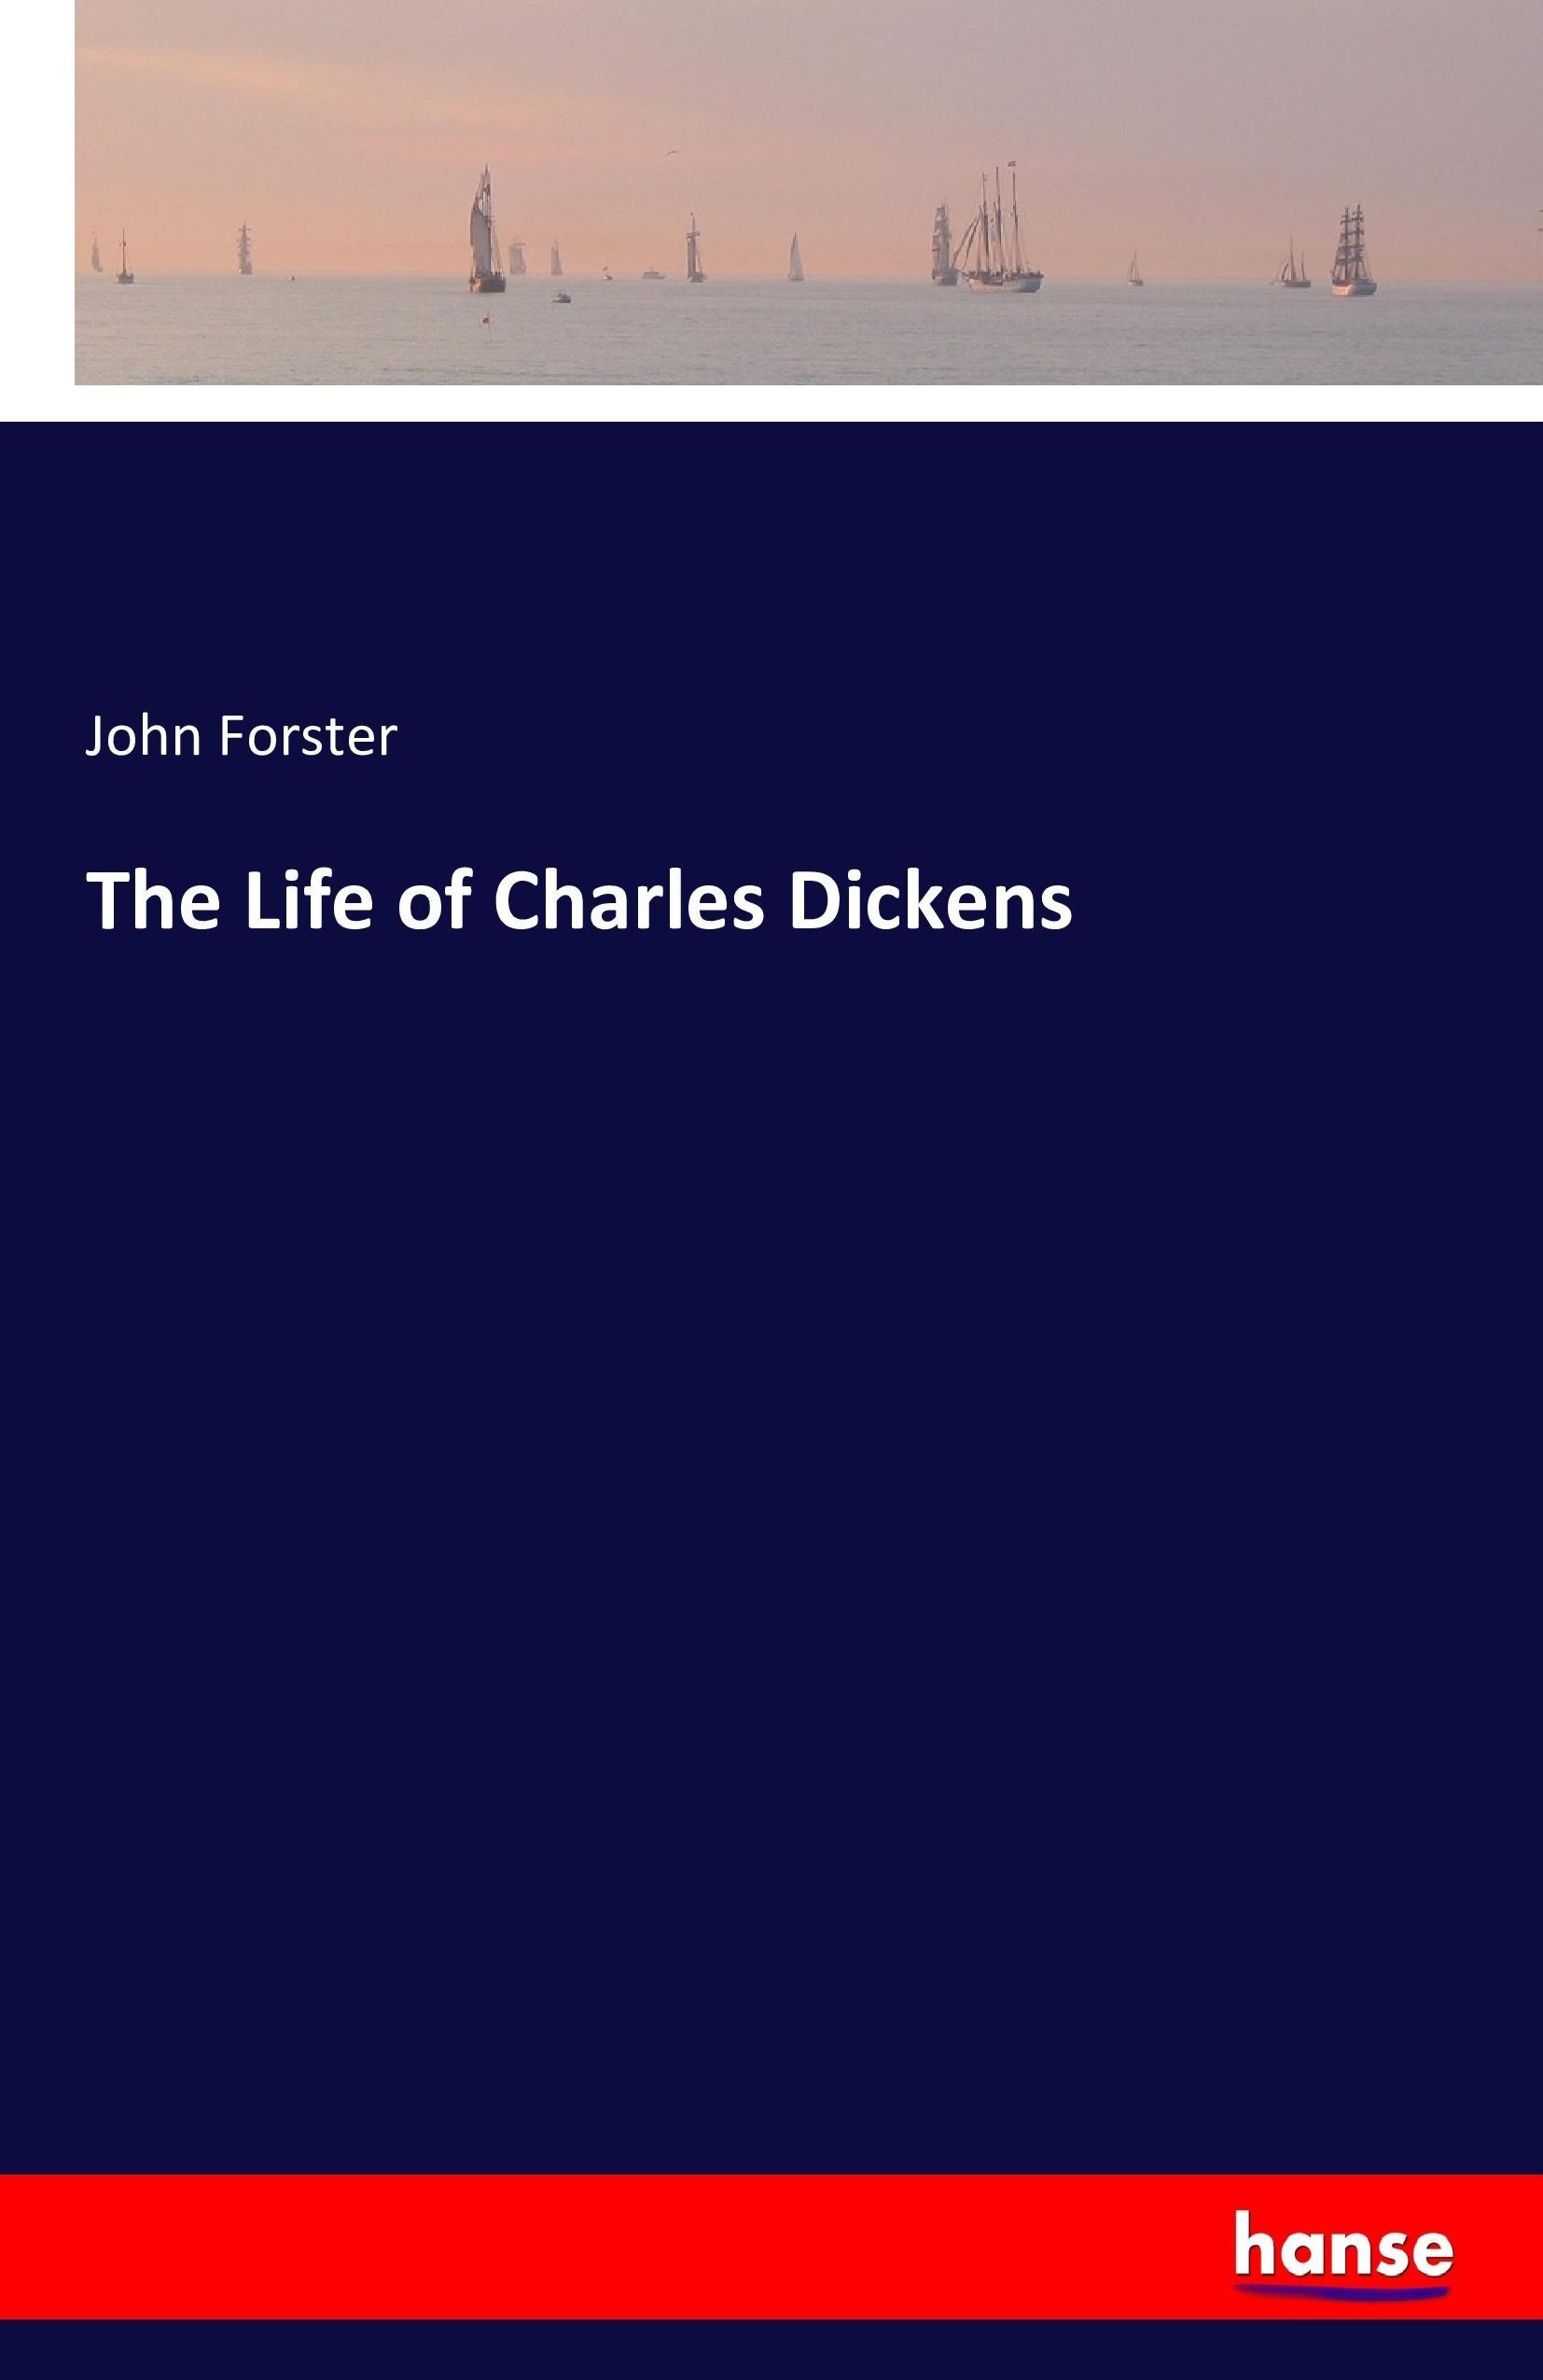 The Life of Charles Dickens - Forster, John